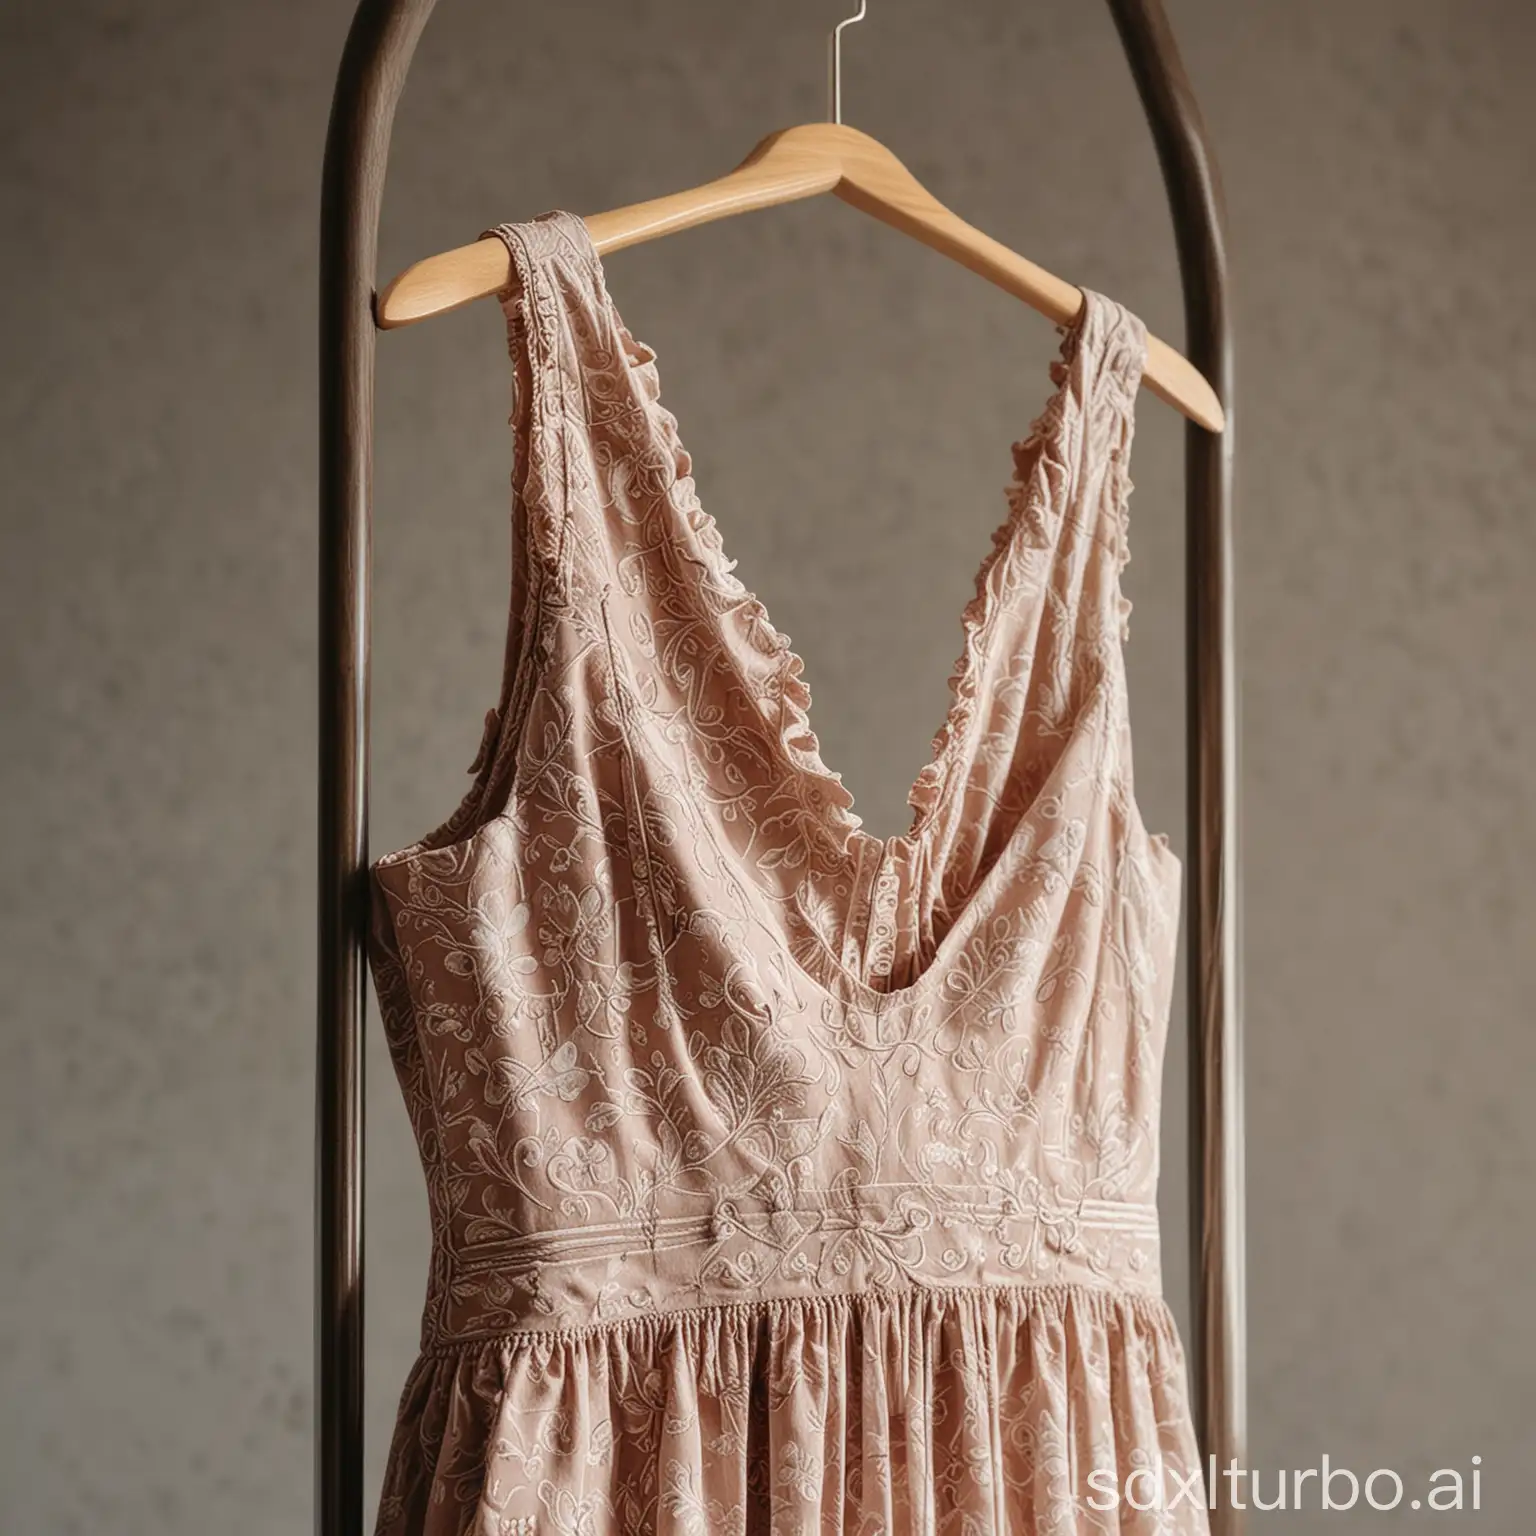 A close-up image of a women's dress hanging on a clothes rack. The dress is made of a luxurious fabric and has a beautiful design.